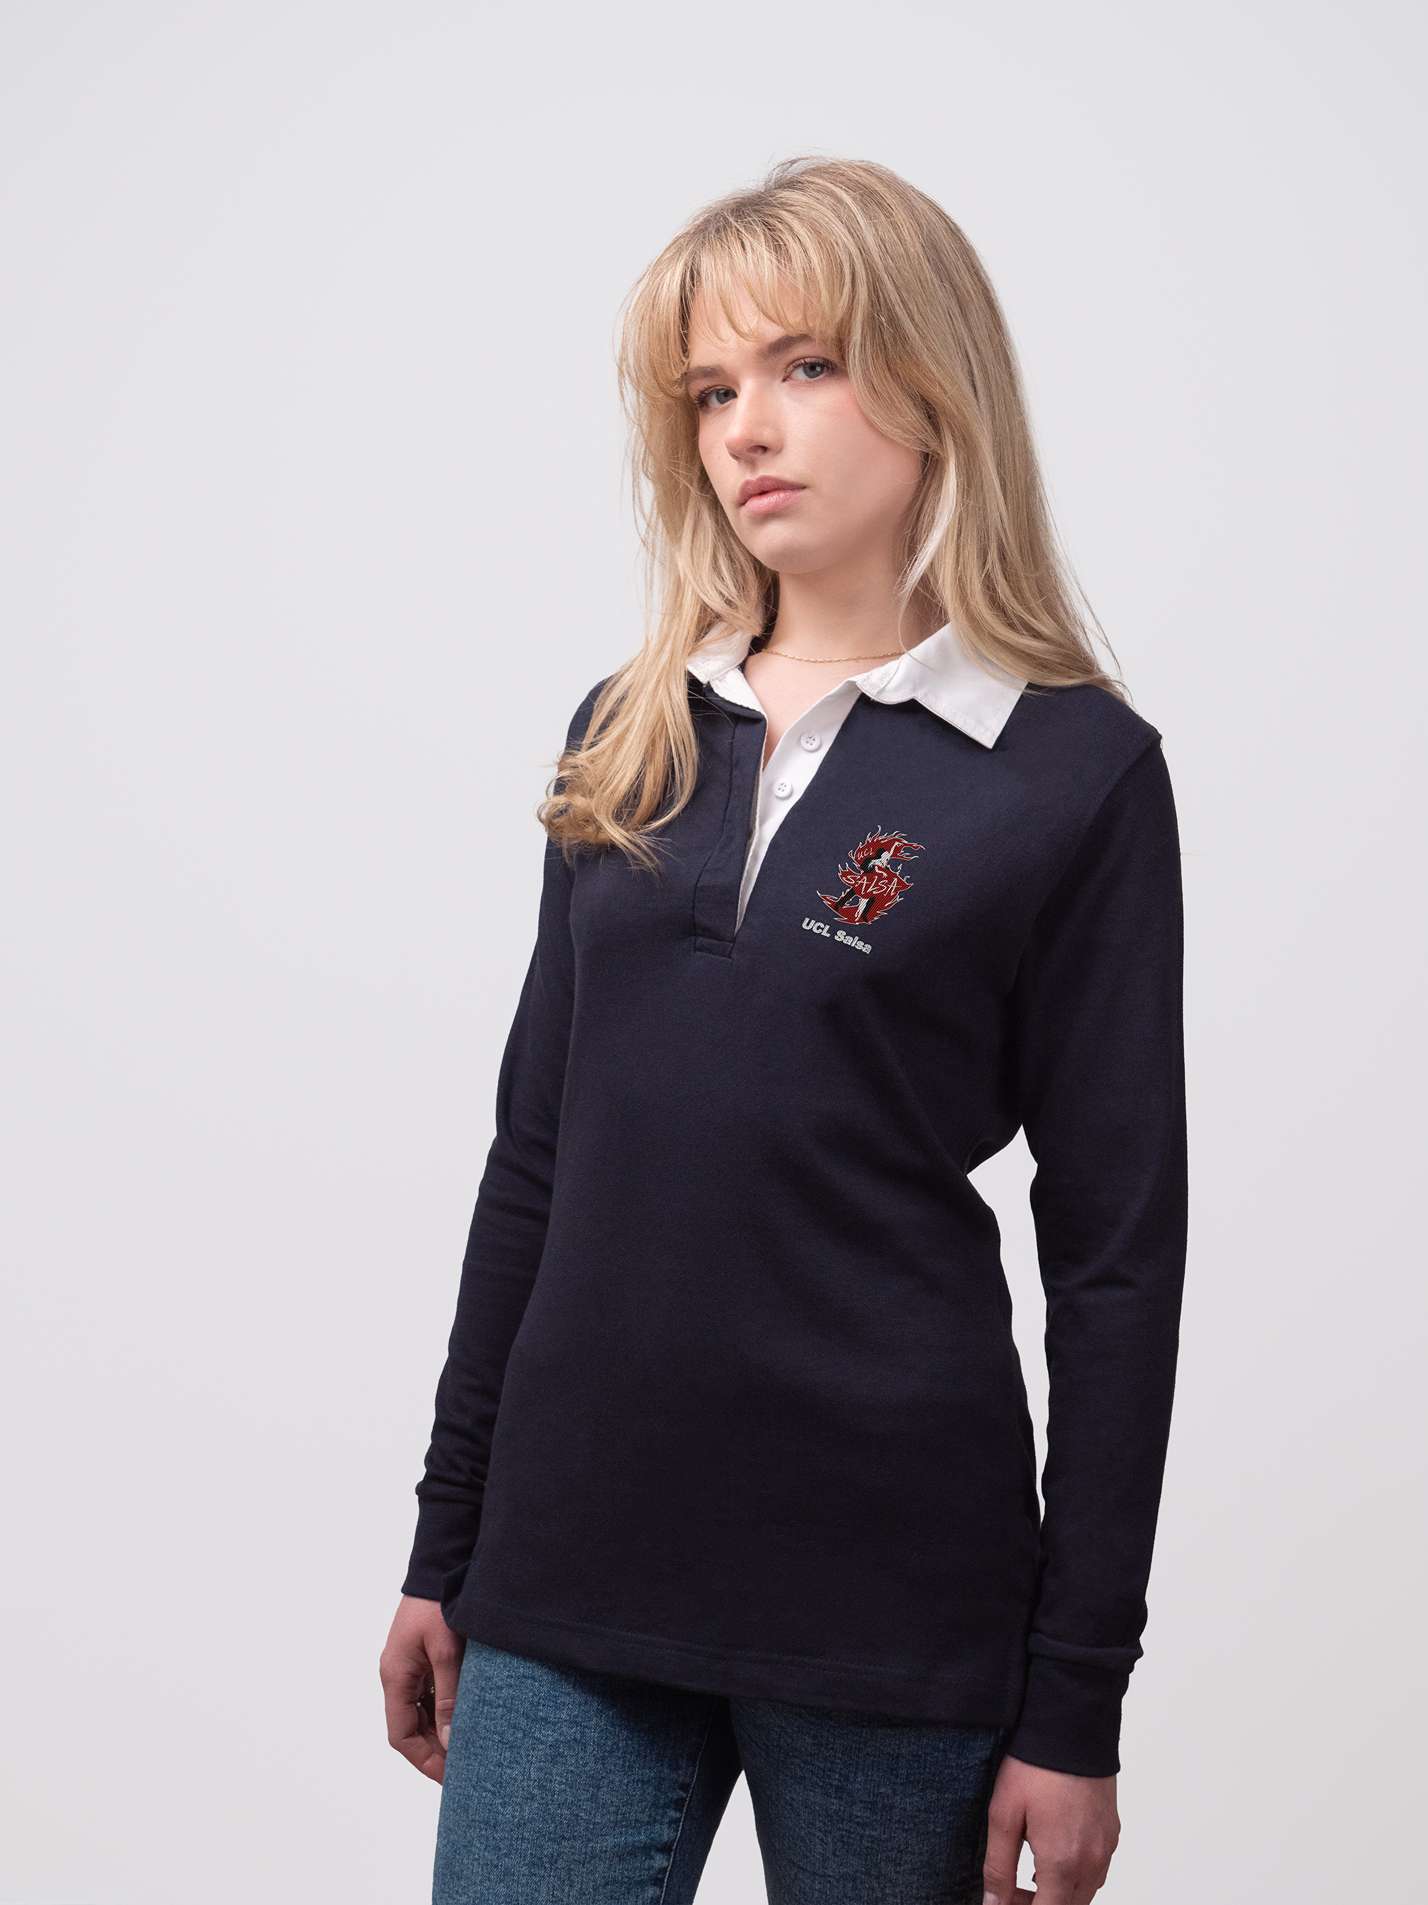 UCL Salsa Classic Ladies Rugby Shirt